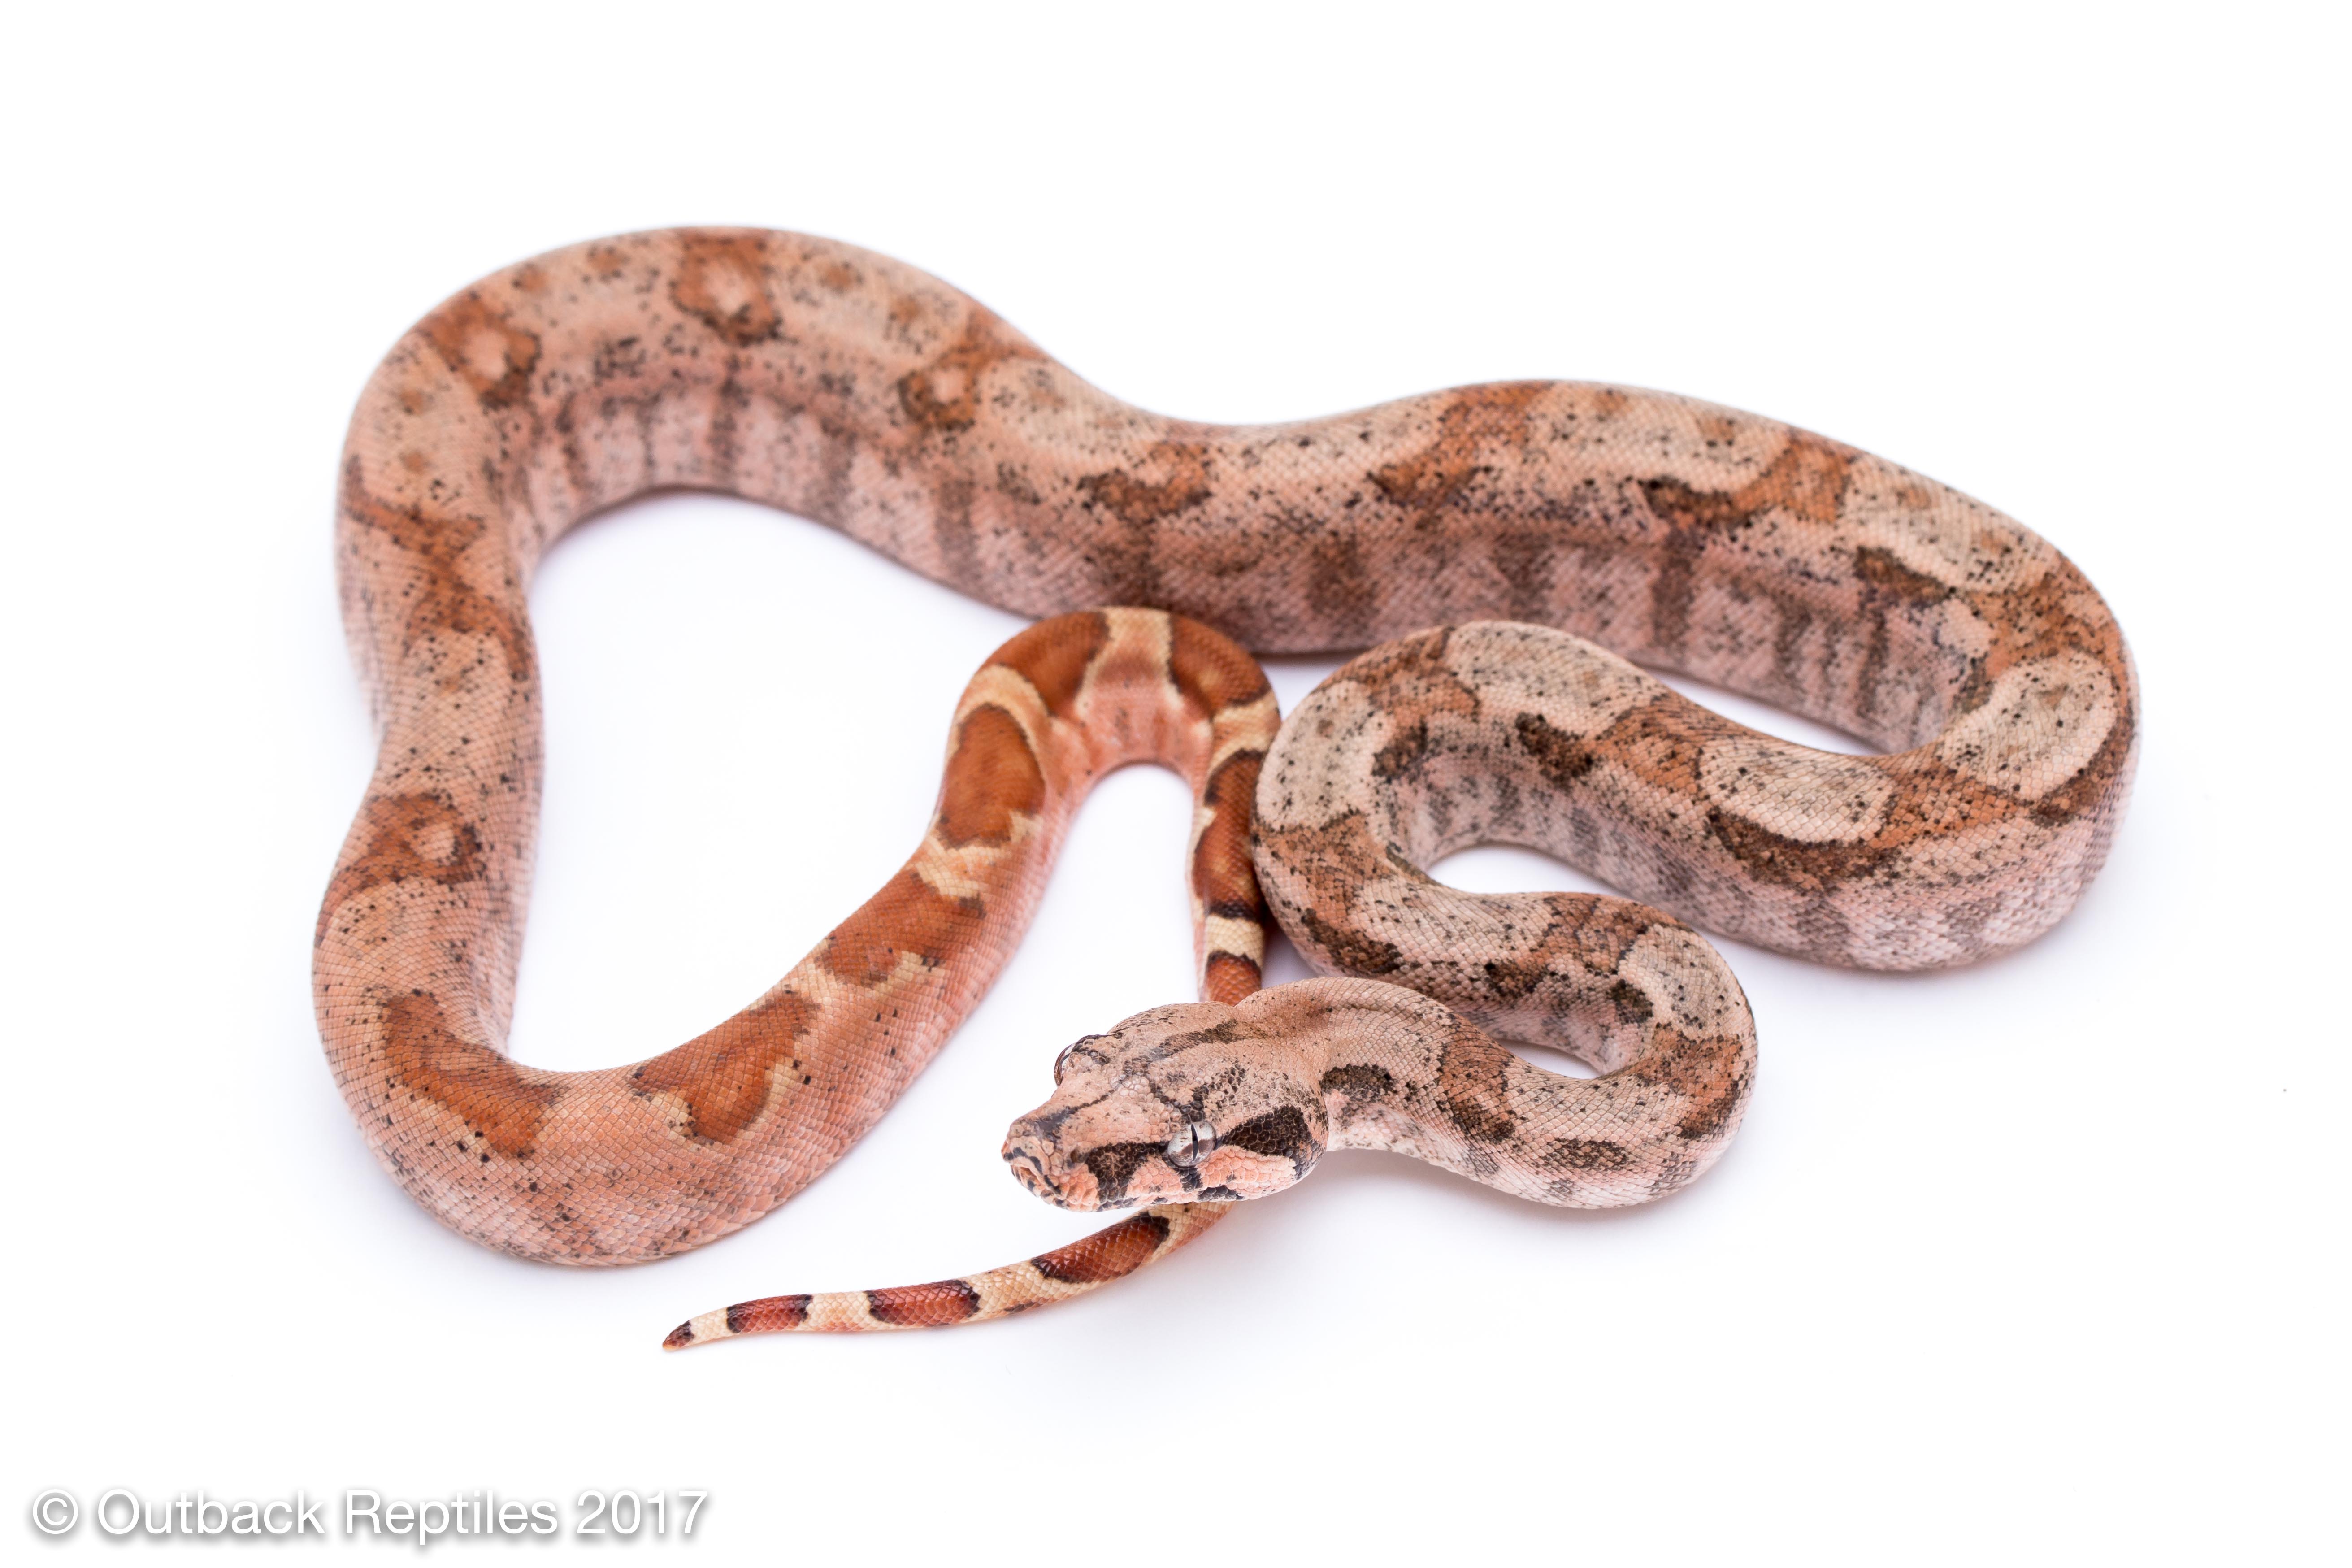 Red Tailed Boas - Boa constrictor sp. 